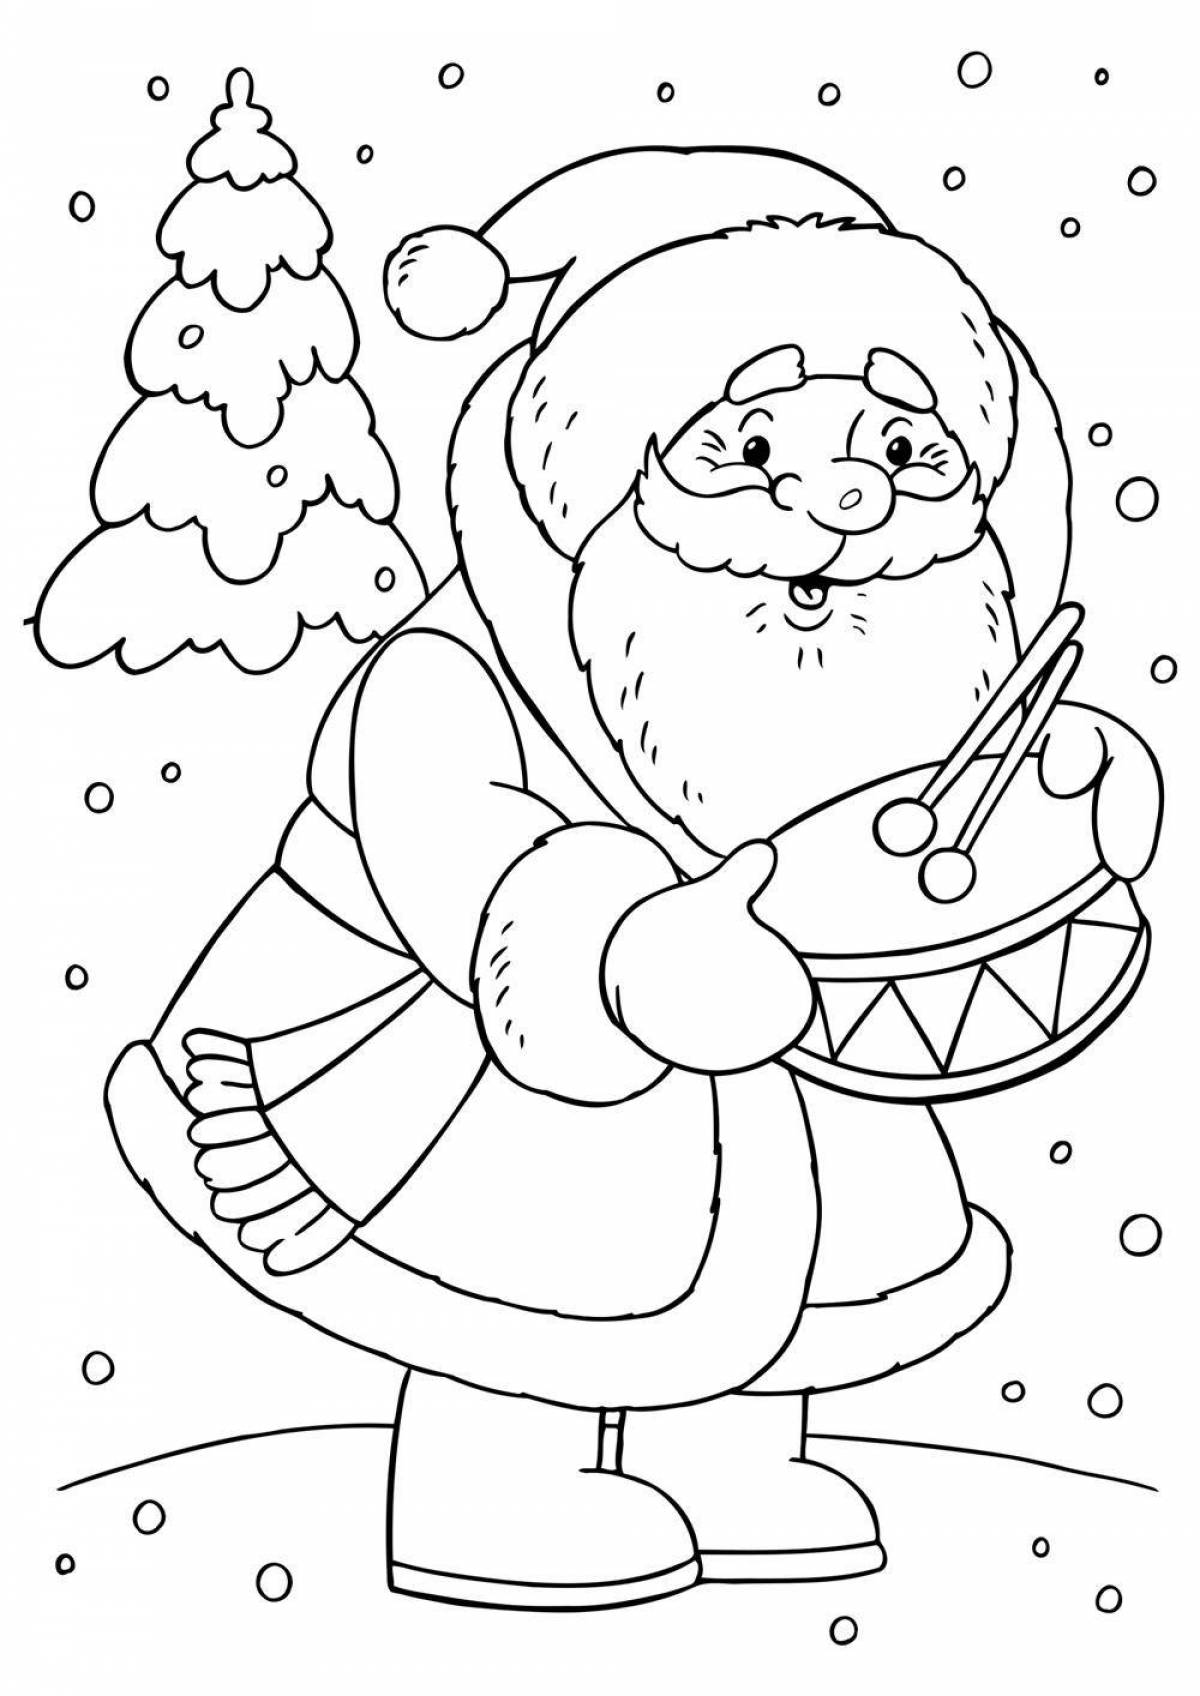 Magical Christmas coloring book for kids 6-7 years old